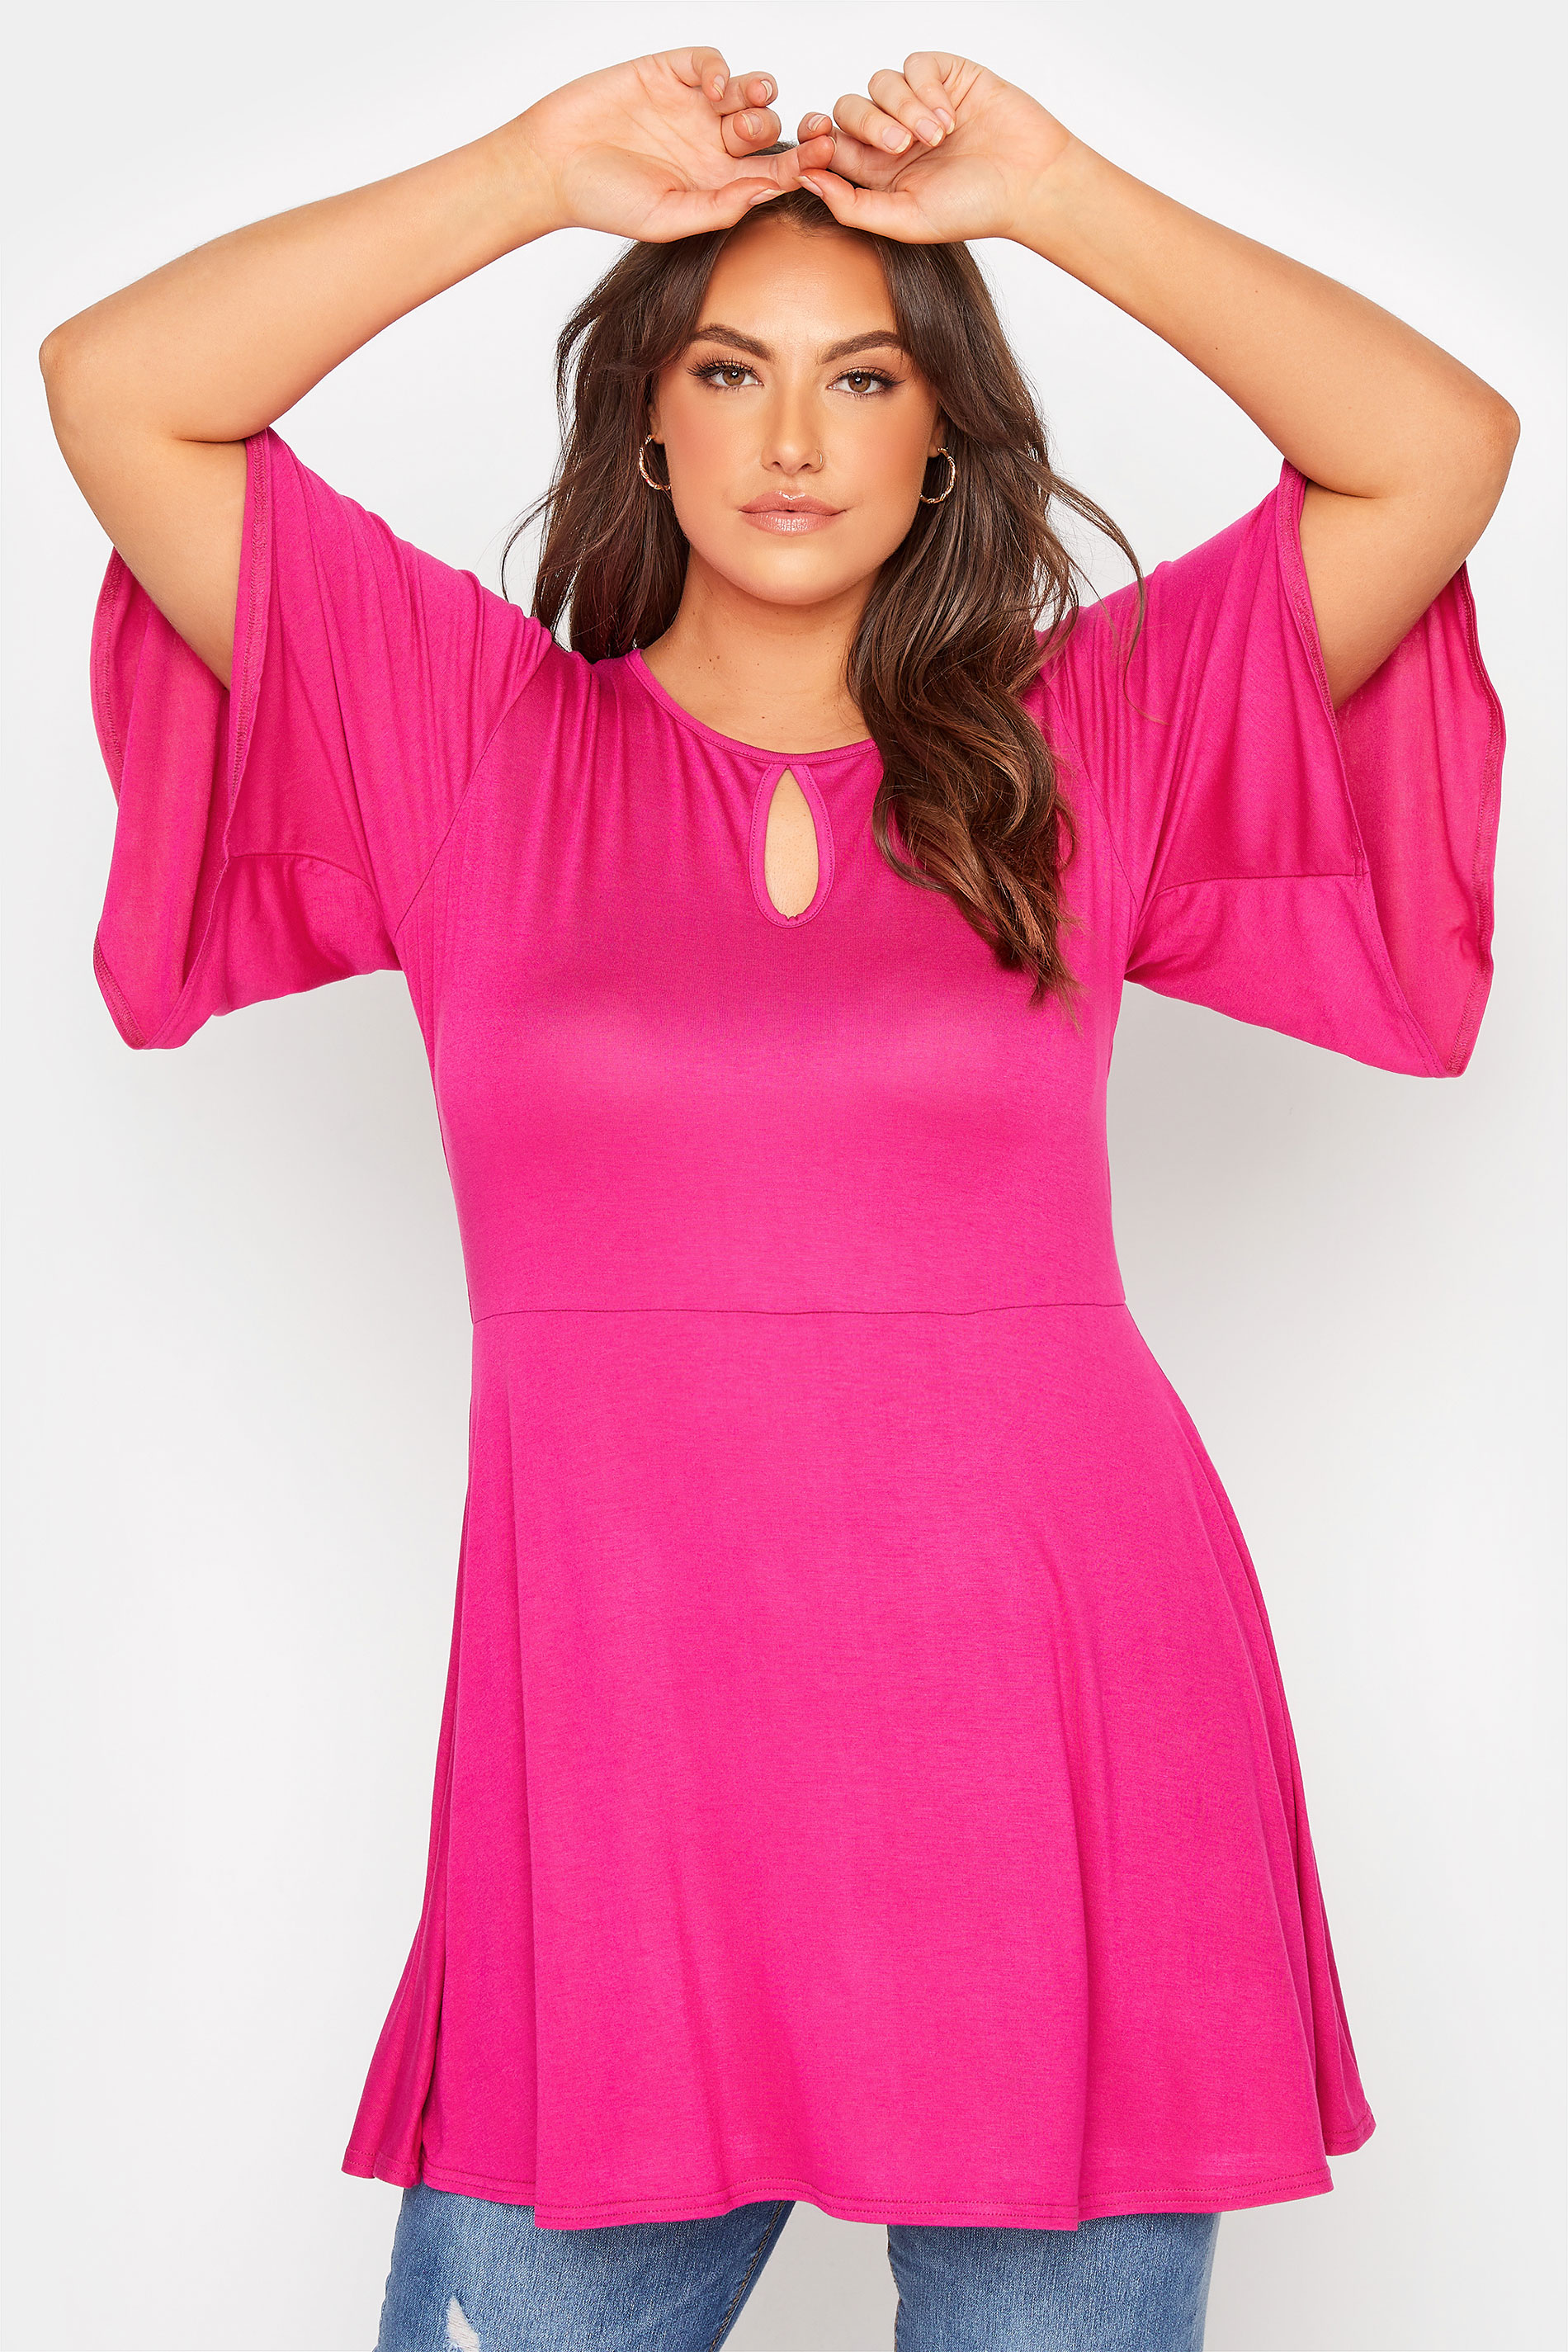 LIMITED COLLECTION Curve Hot Pink Keyhole Peplum Top_AR.jpg